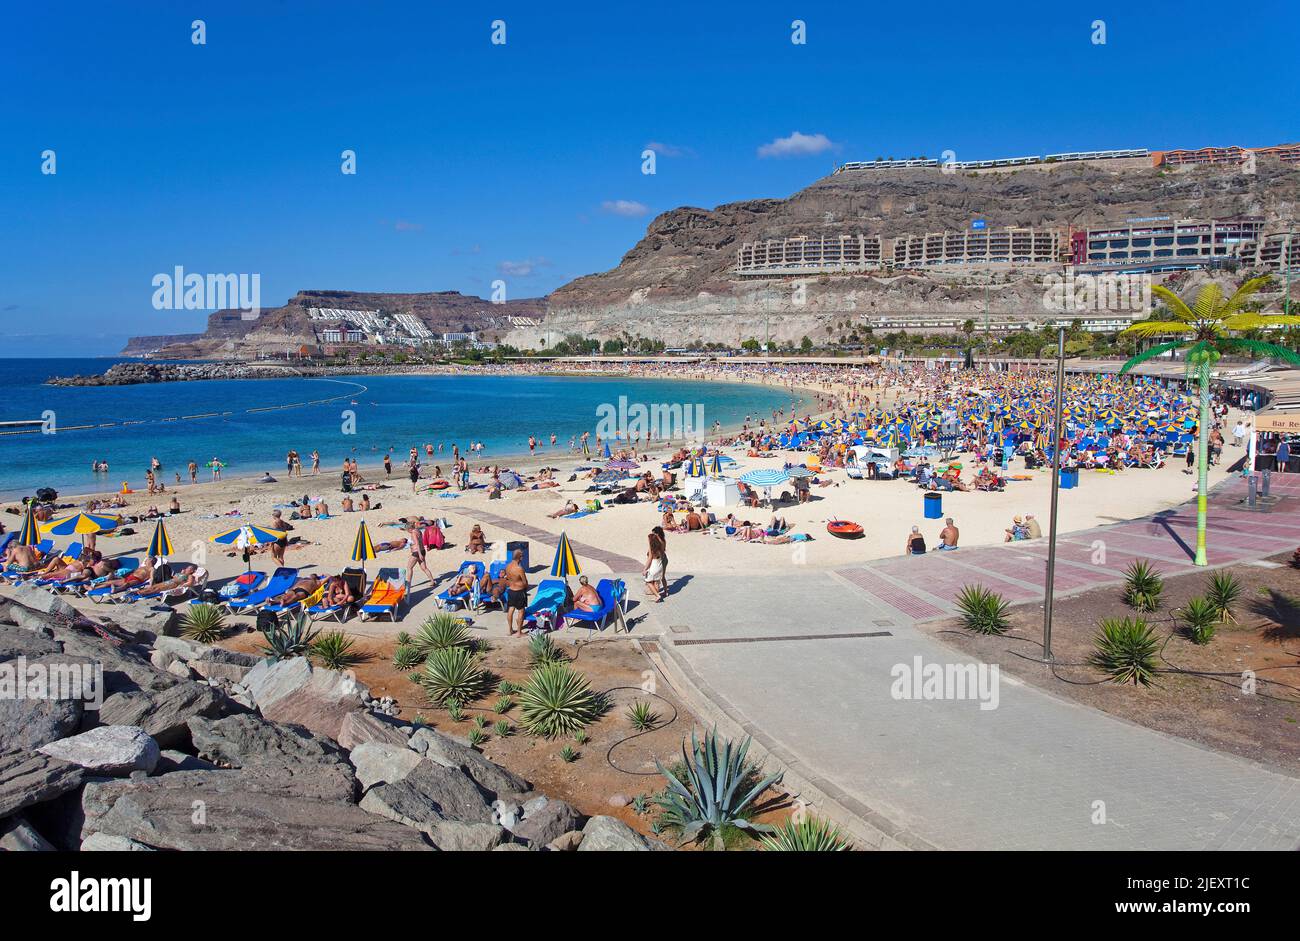 Holidaymakers on Playa de los Amadores, bathing beach close to Puerto Rico, Grand Canary, Canary islands, Spain, Europe, Atlantic ocean Stock Photo